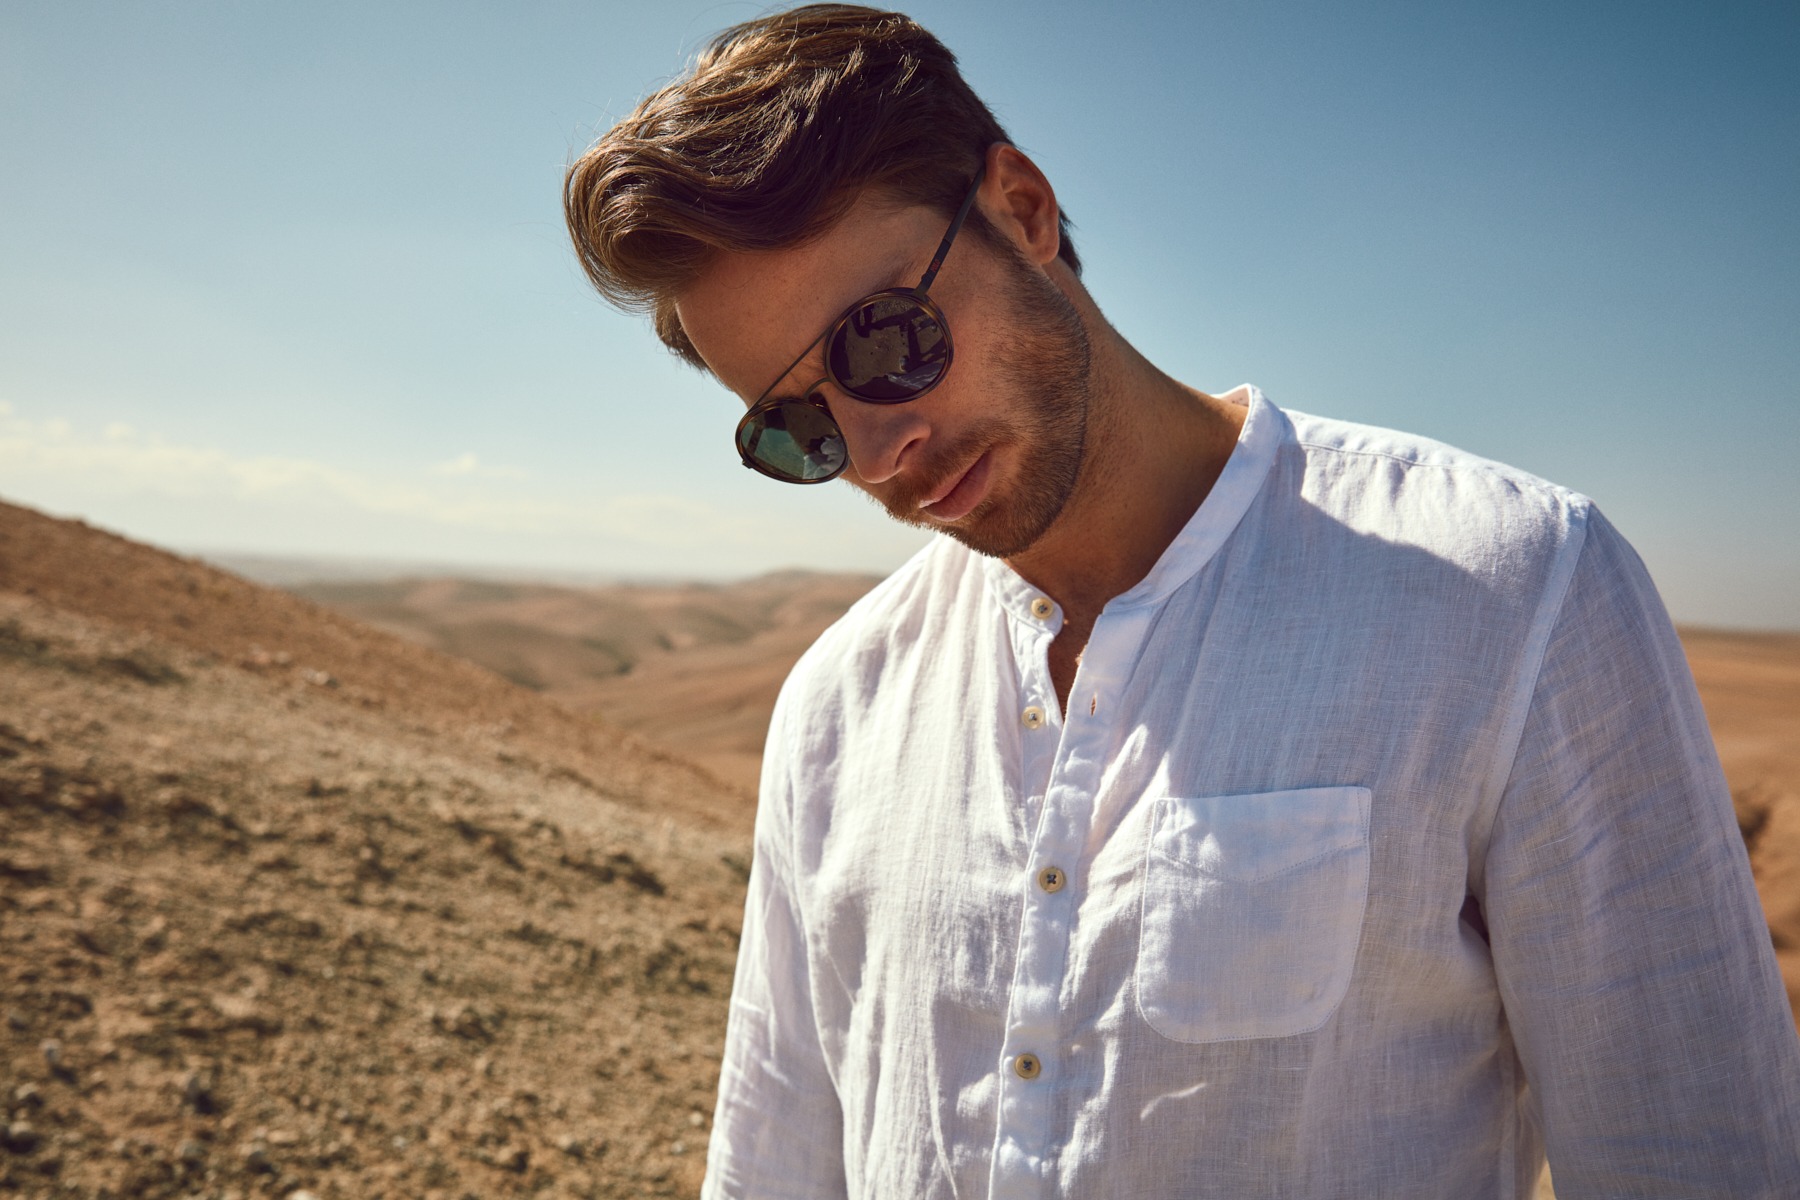 l&t campaign morocco (36 images) by Mike Meyer Photography